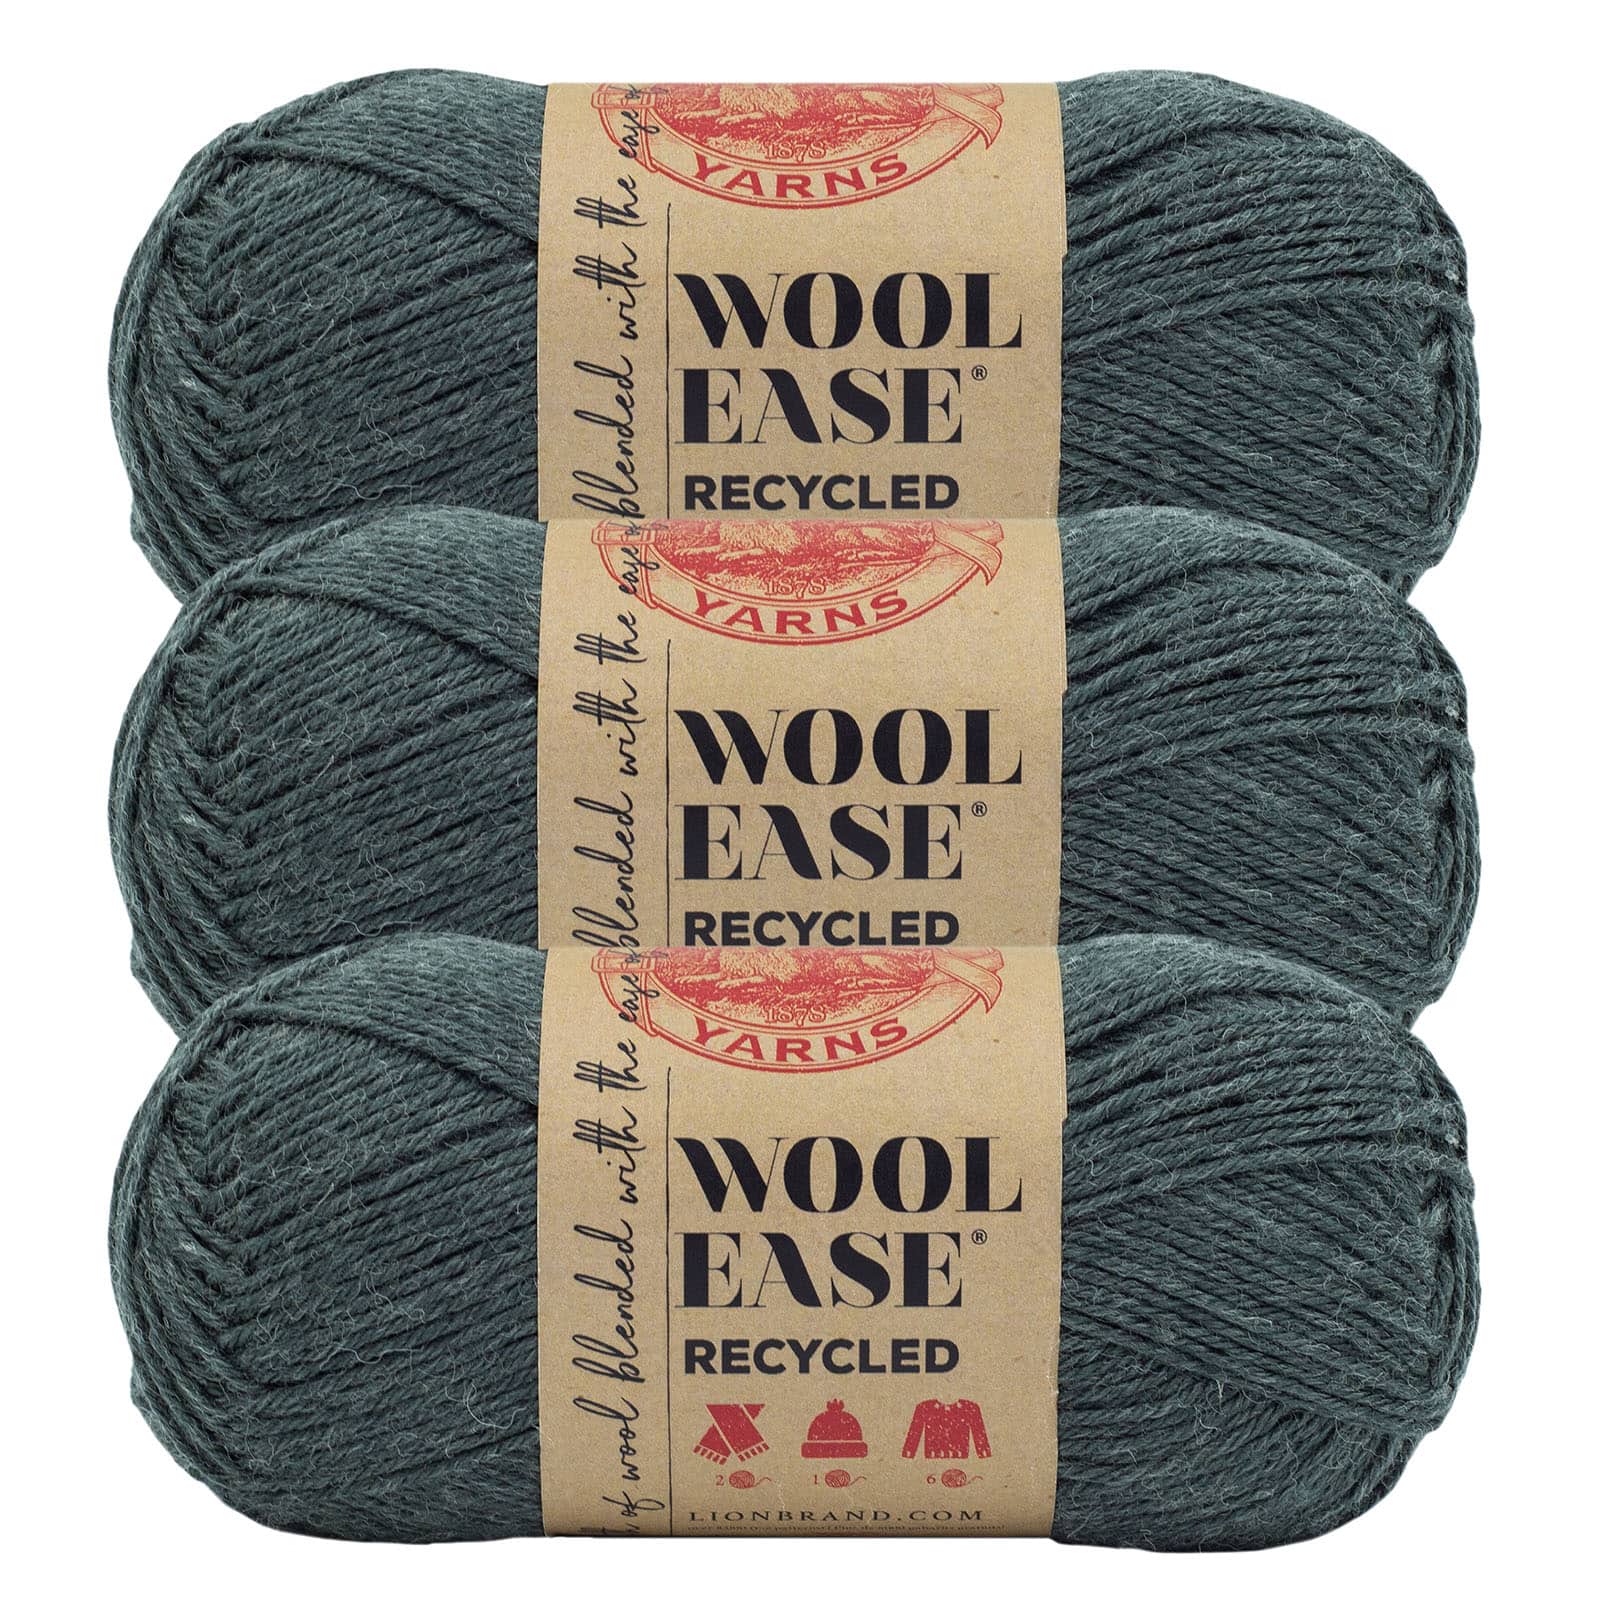 Lion Brand Wool-Ease Yarn -Black, 1 count - Fred Meyer